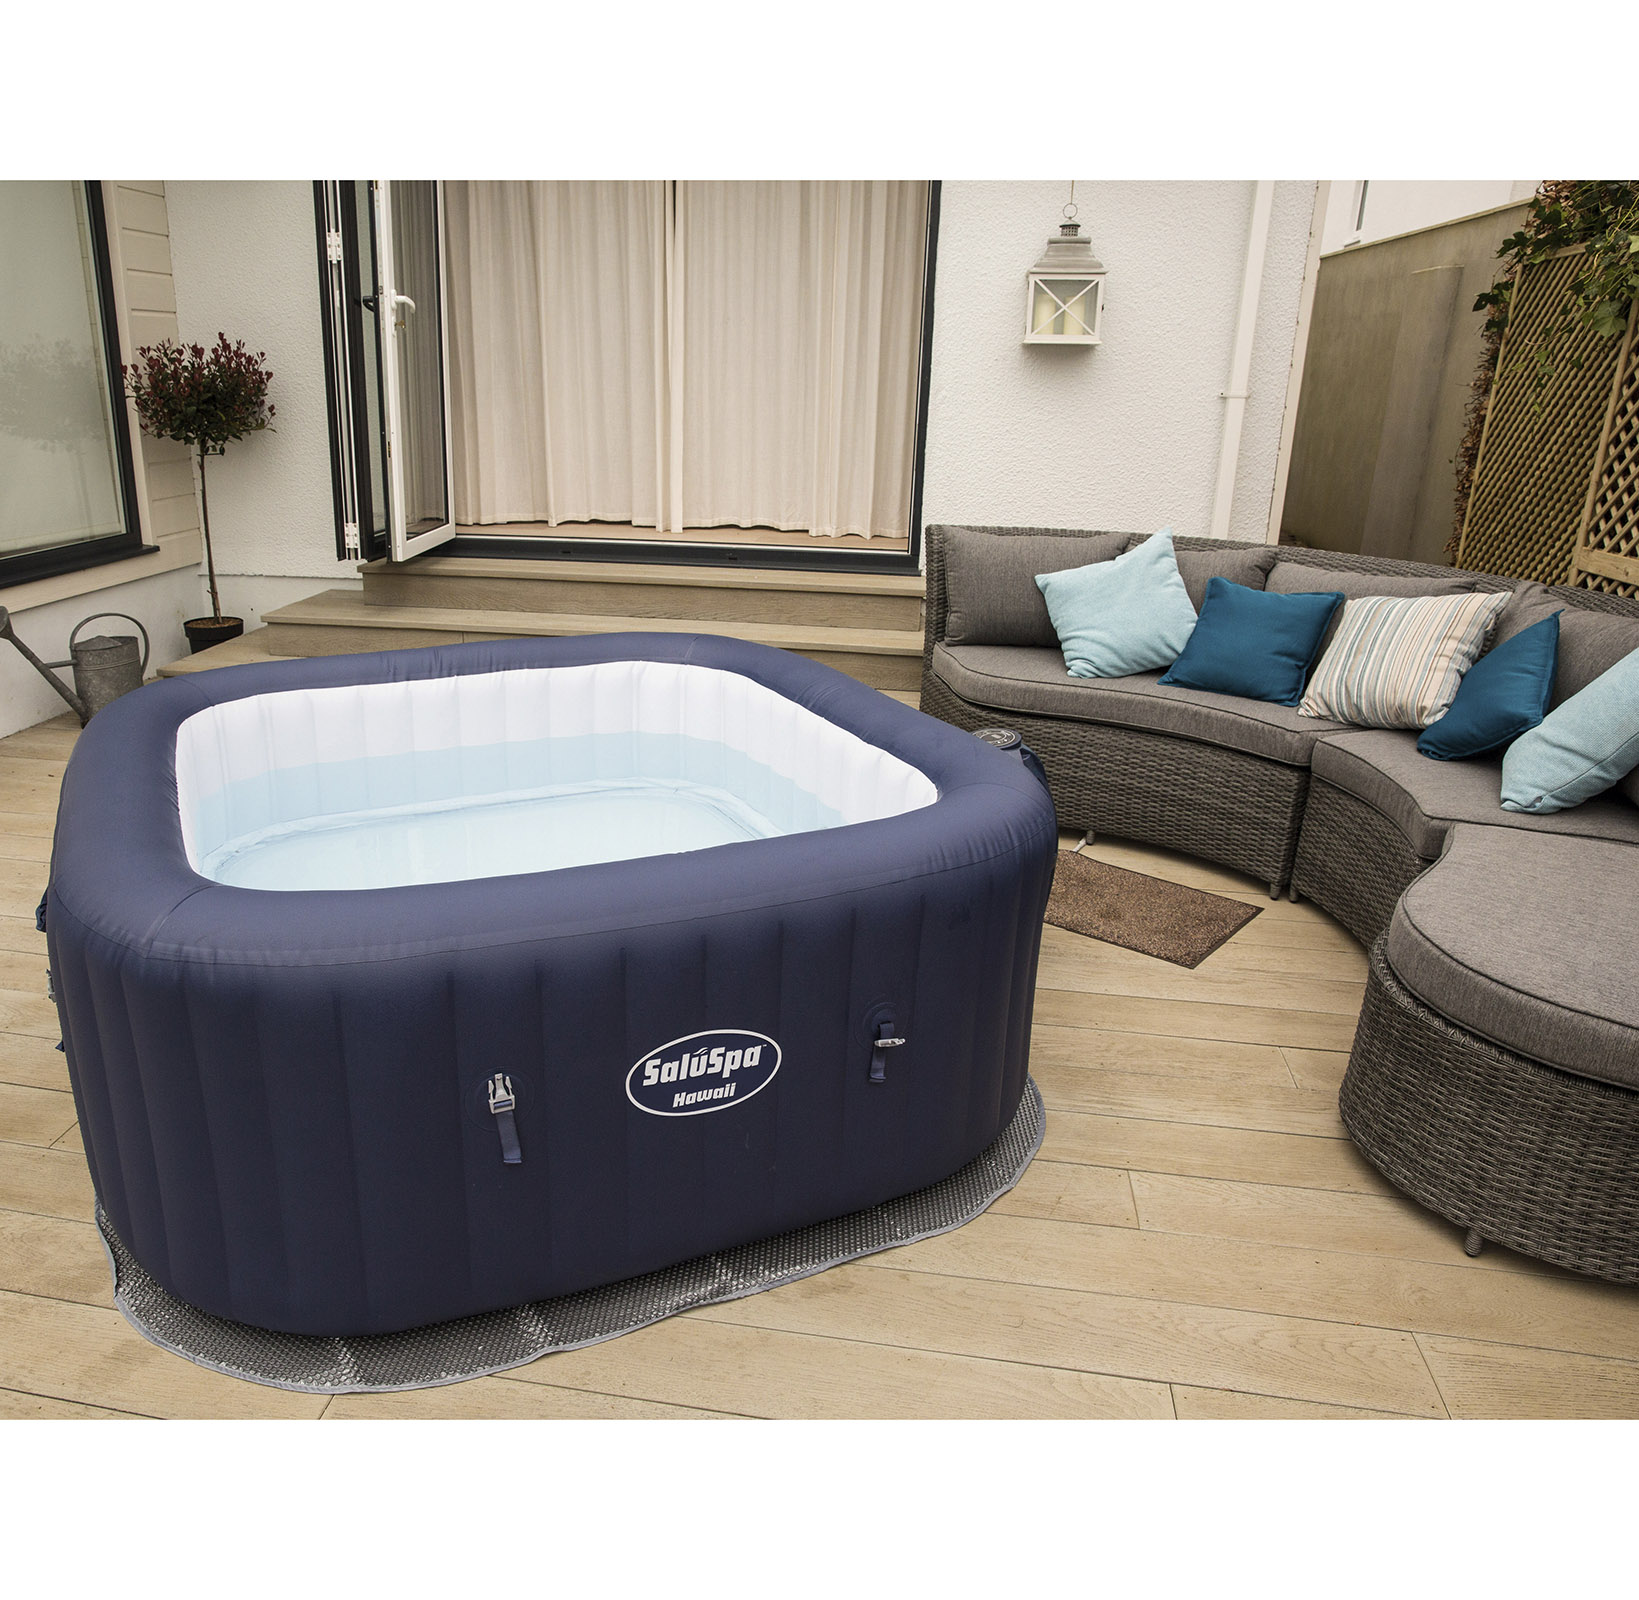 Bestway 6-Person Inflatable Rectangular Hot Tub at Lowes.com